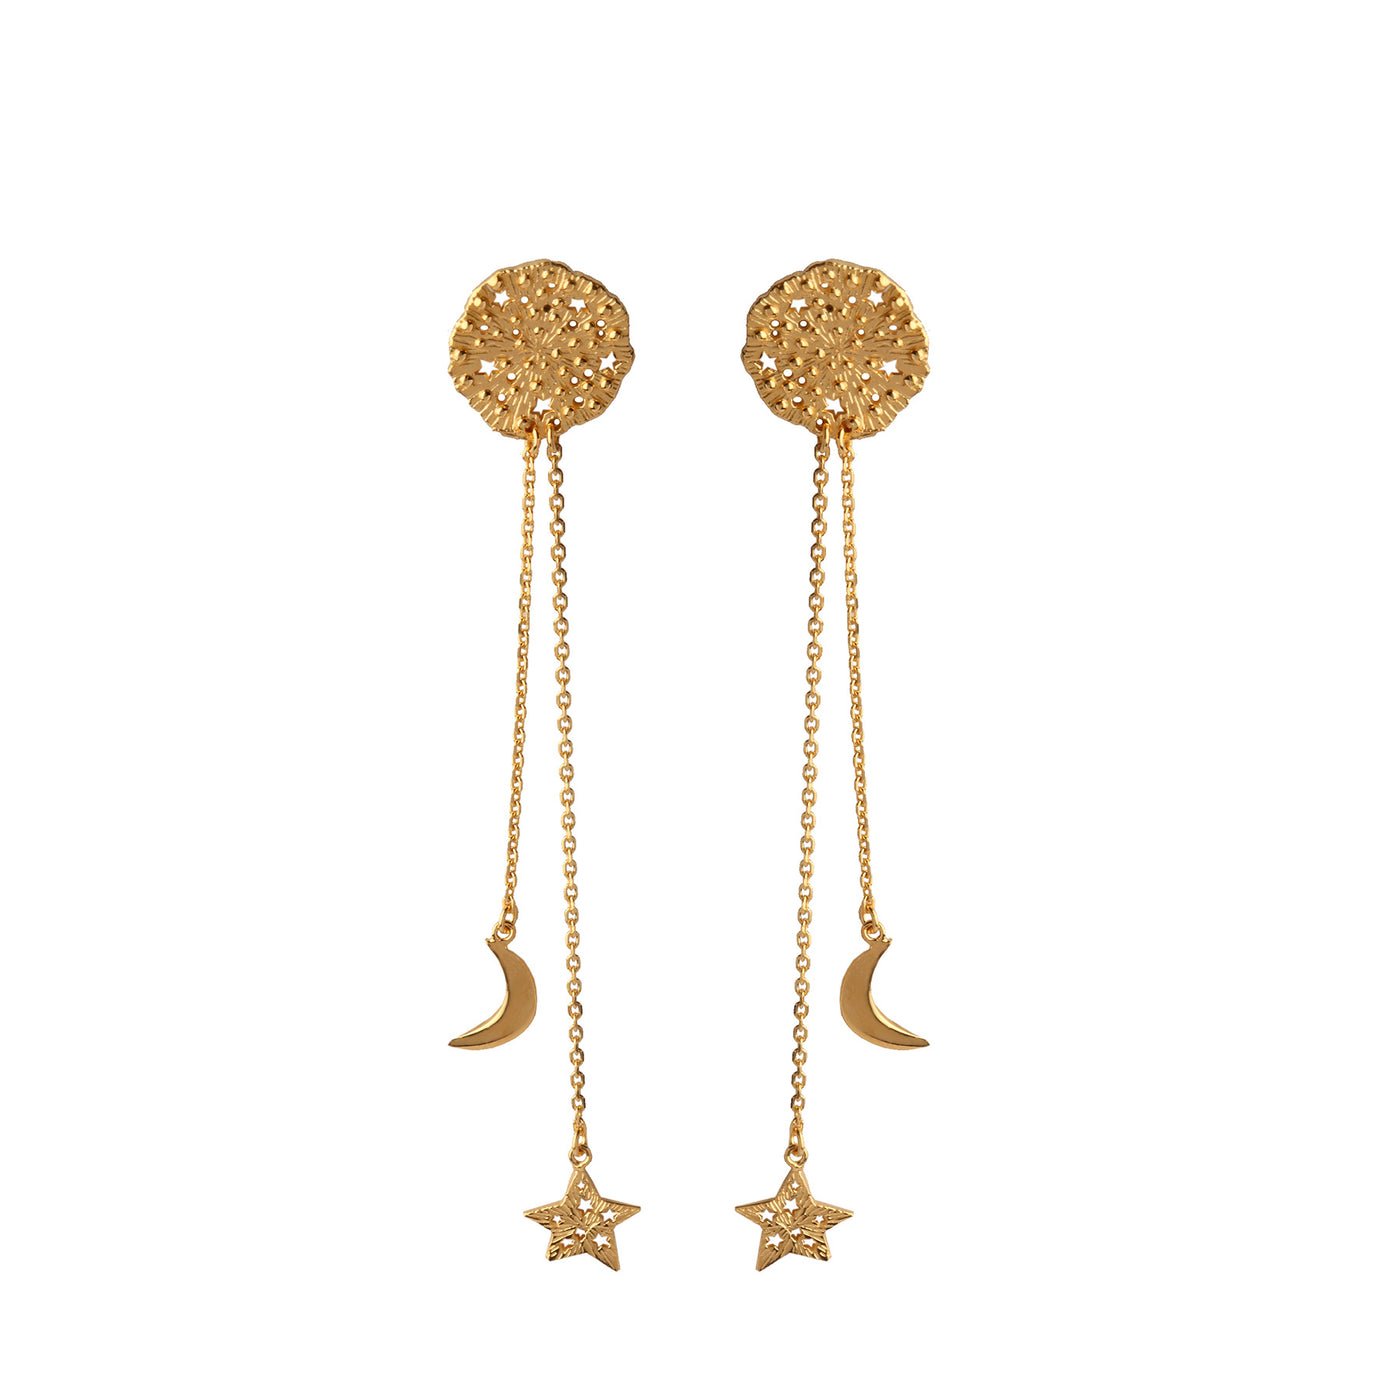 Cosmic medallion with Star and Moon on the chain earrings. Silver, gold-plated